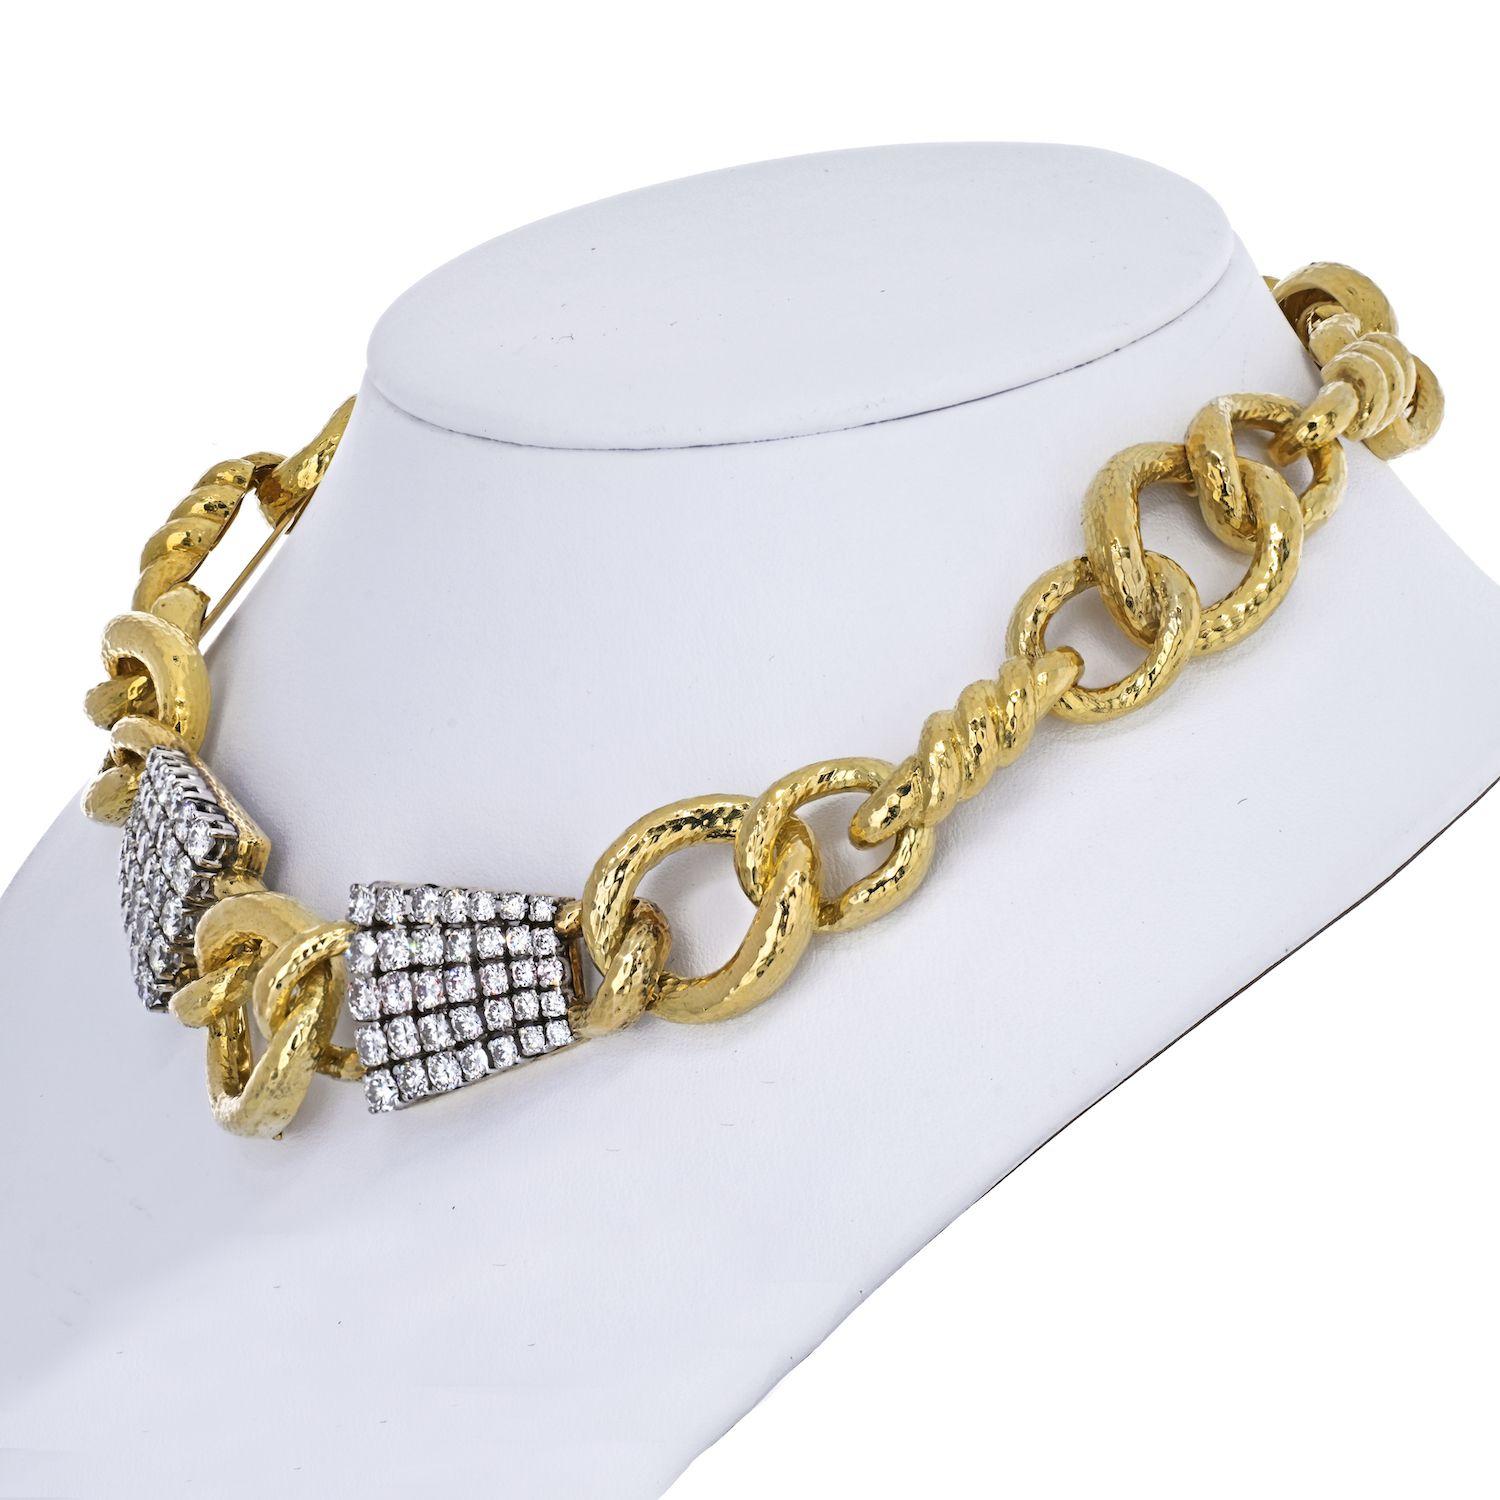 The David Webb Twisted Rope Link Diamond Collar Necklace is a true masterpiece, elegantly crafted with brilliant-cut diamonds, hammered 18K gold, and platinum. This exquisite piece measures 16 inches in length and has a substantial weight of 128